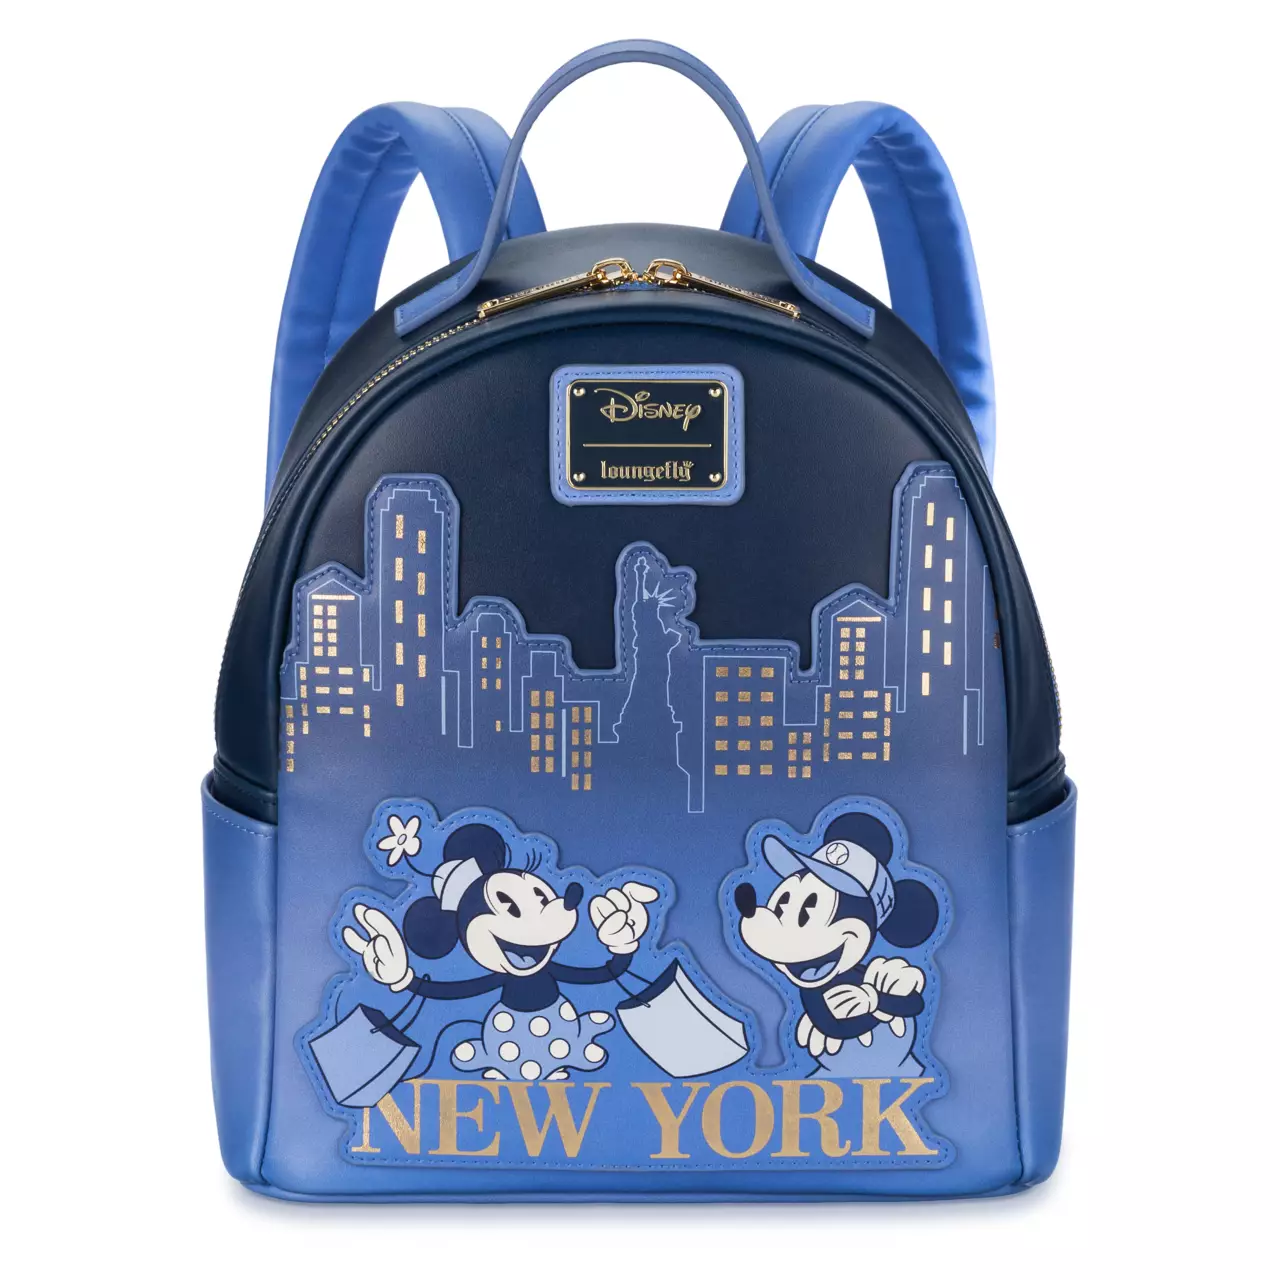 Disney Store in Times Square Mickey and Minnie New York Loungefly mini-backpack